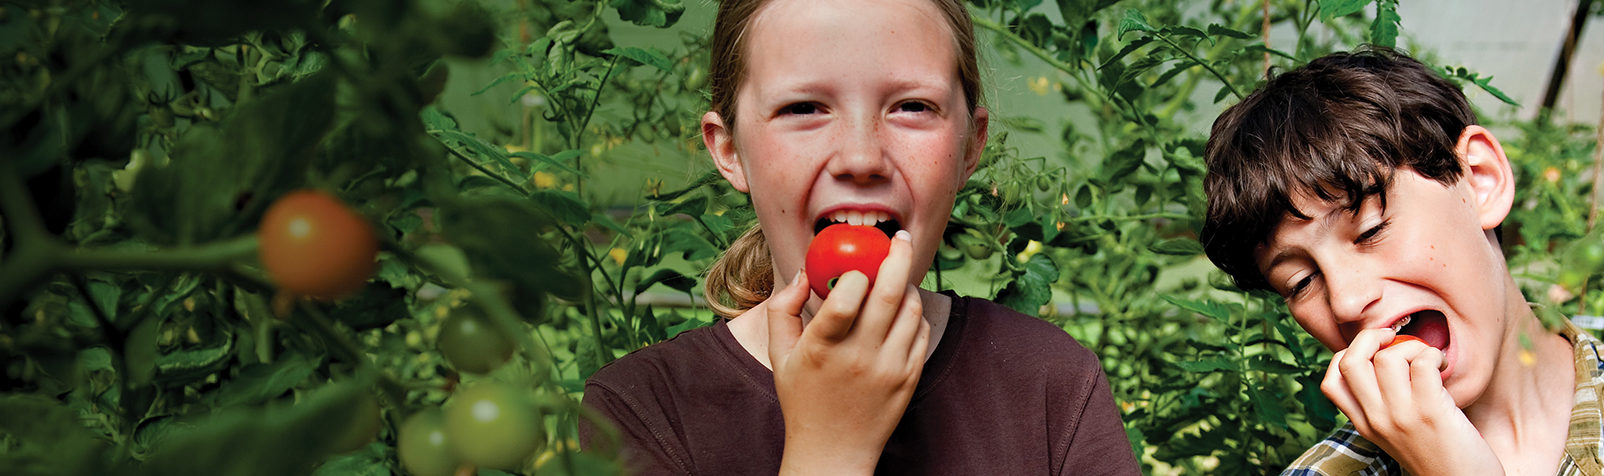 Kids in Polytunnel eat Tomatoes